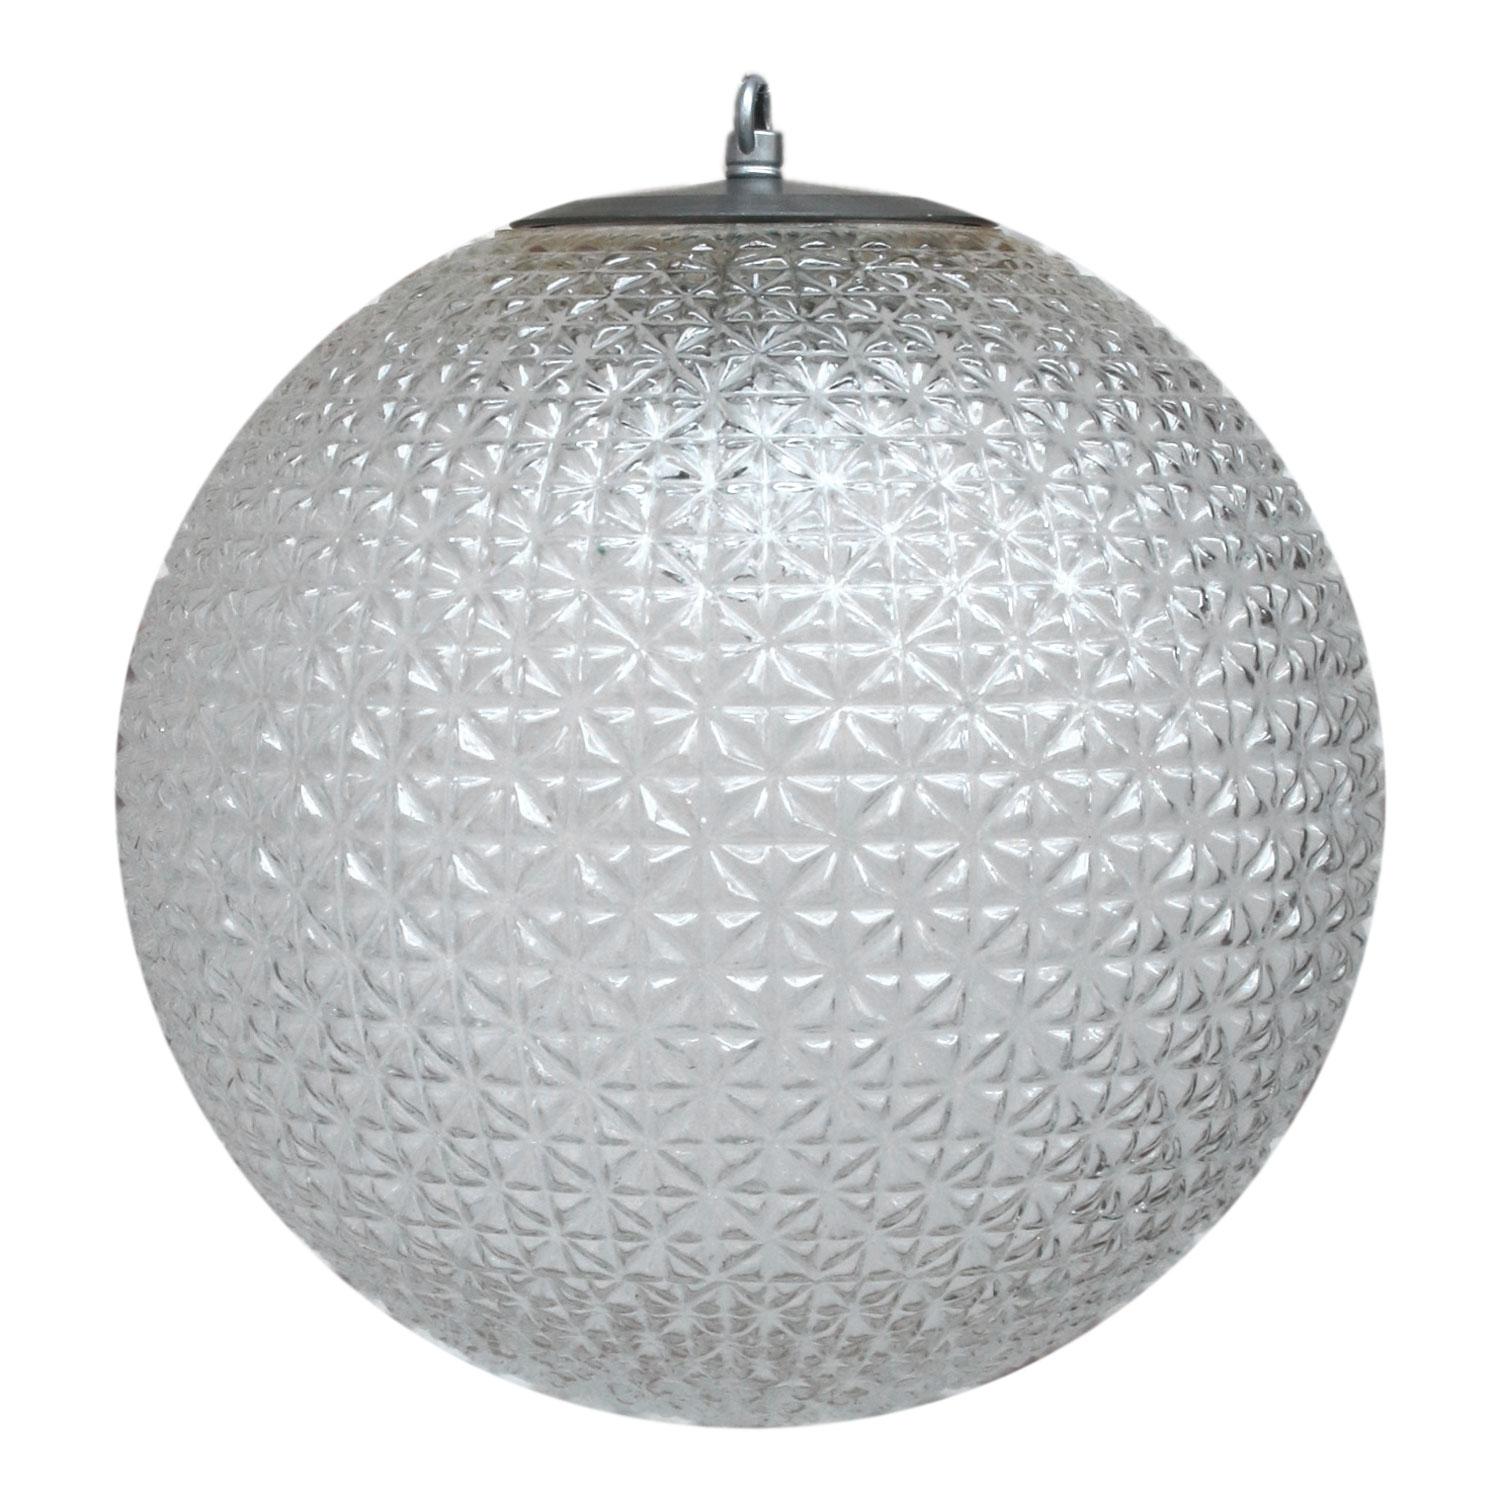 Clear texture glass pendant.

Weight: 2.80 kg / 6.2 lb

Priced per individual item. All lamps have been made suitable by international standards for incandescent light bulbs, energy-efficient and LED bulbs. E26/E27 bulb holders and new wiring